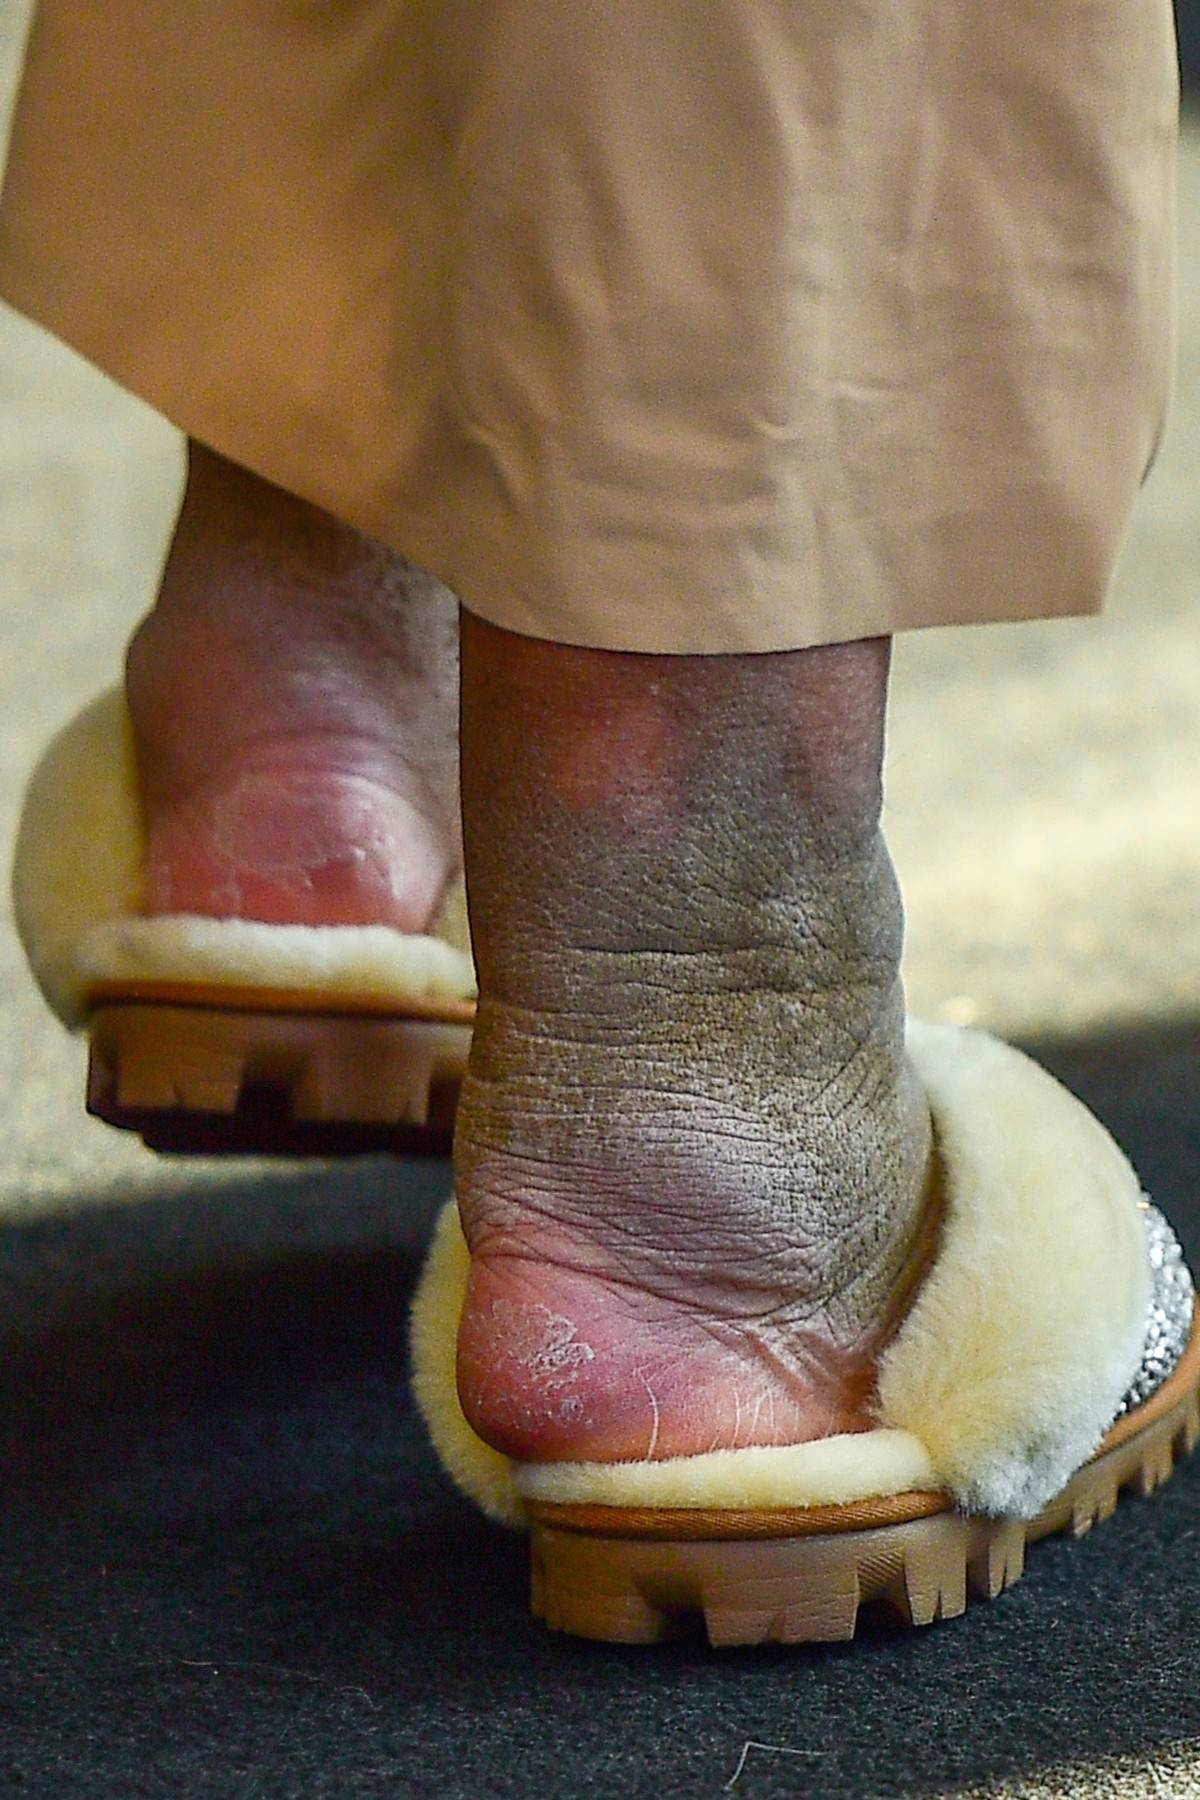 *PREMIUM-EXCLUSIVE* Wendy Williams arriving at her office displaying what Lymphedema is causing to her ankles!